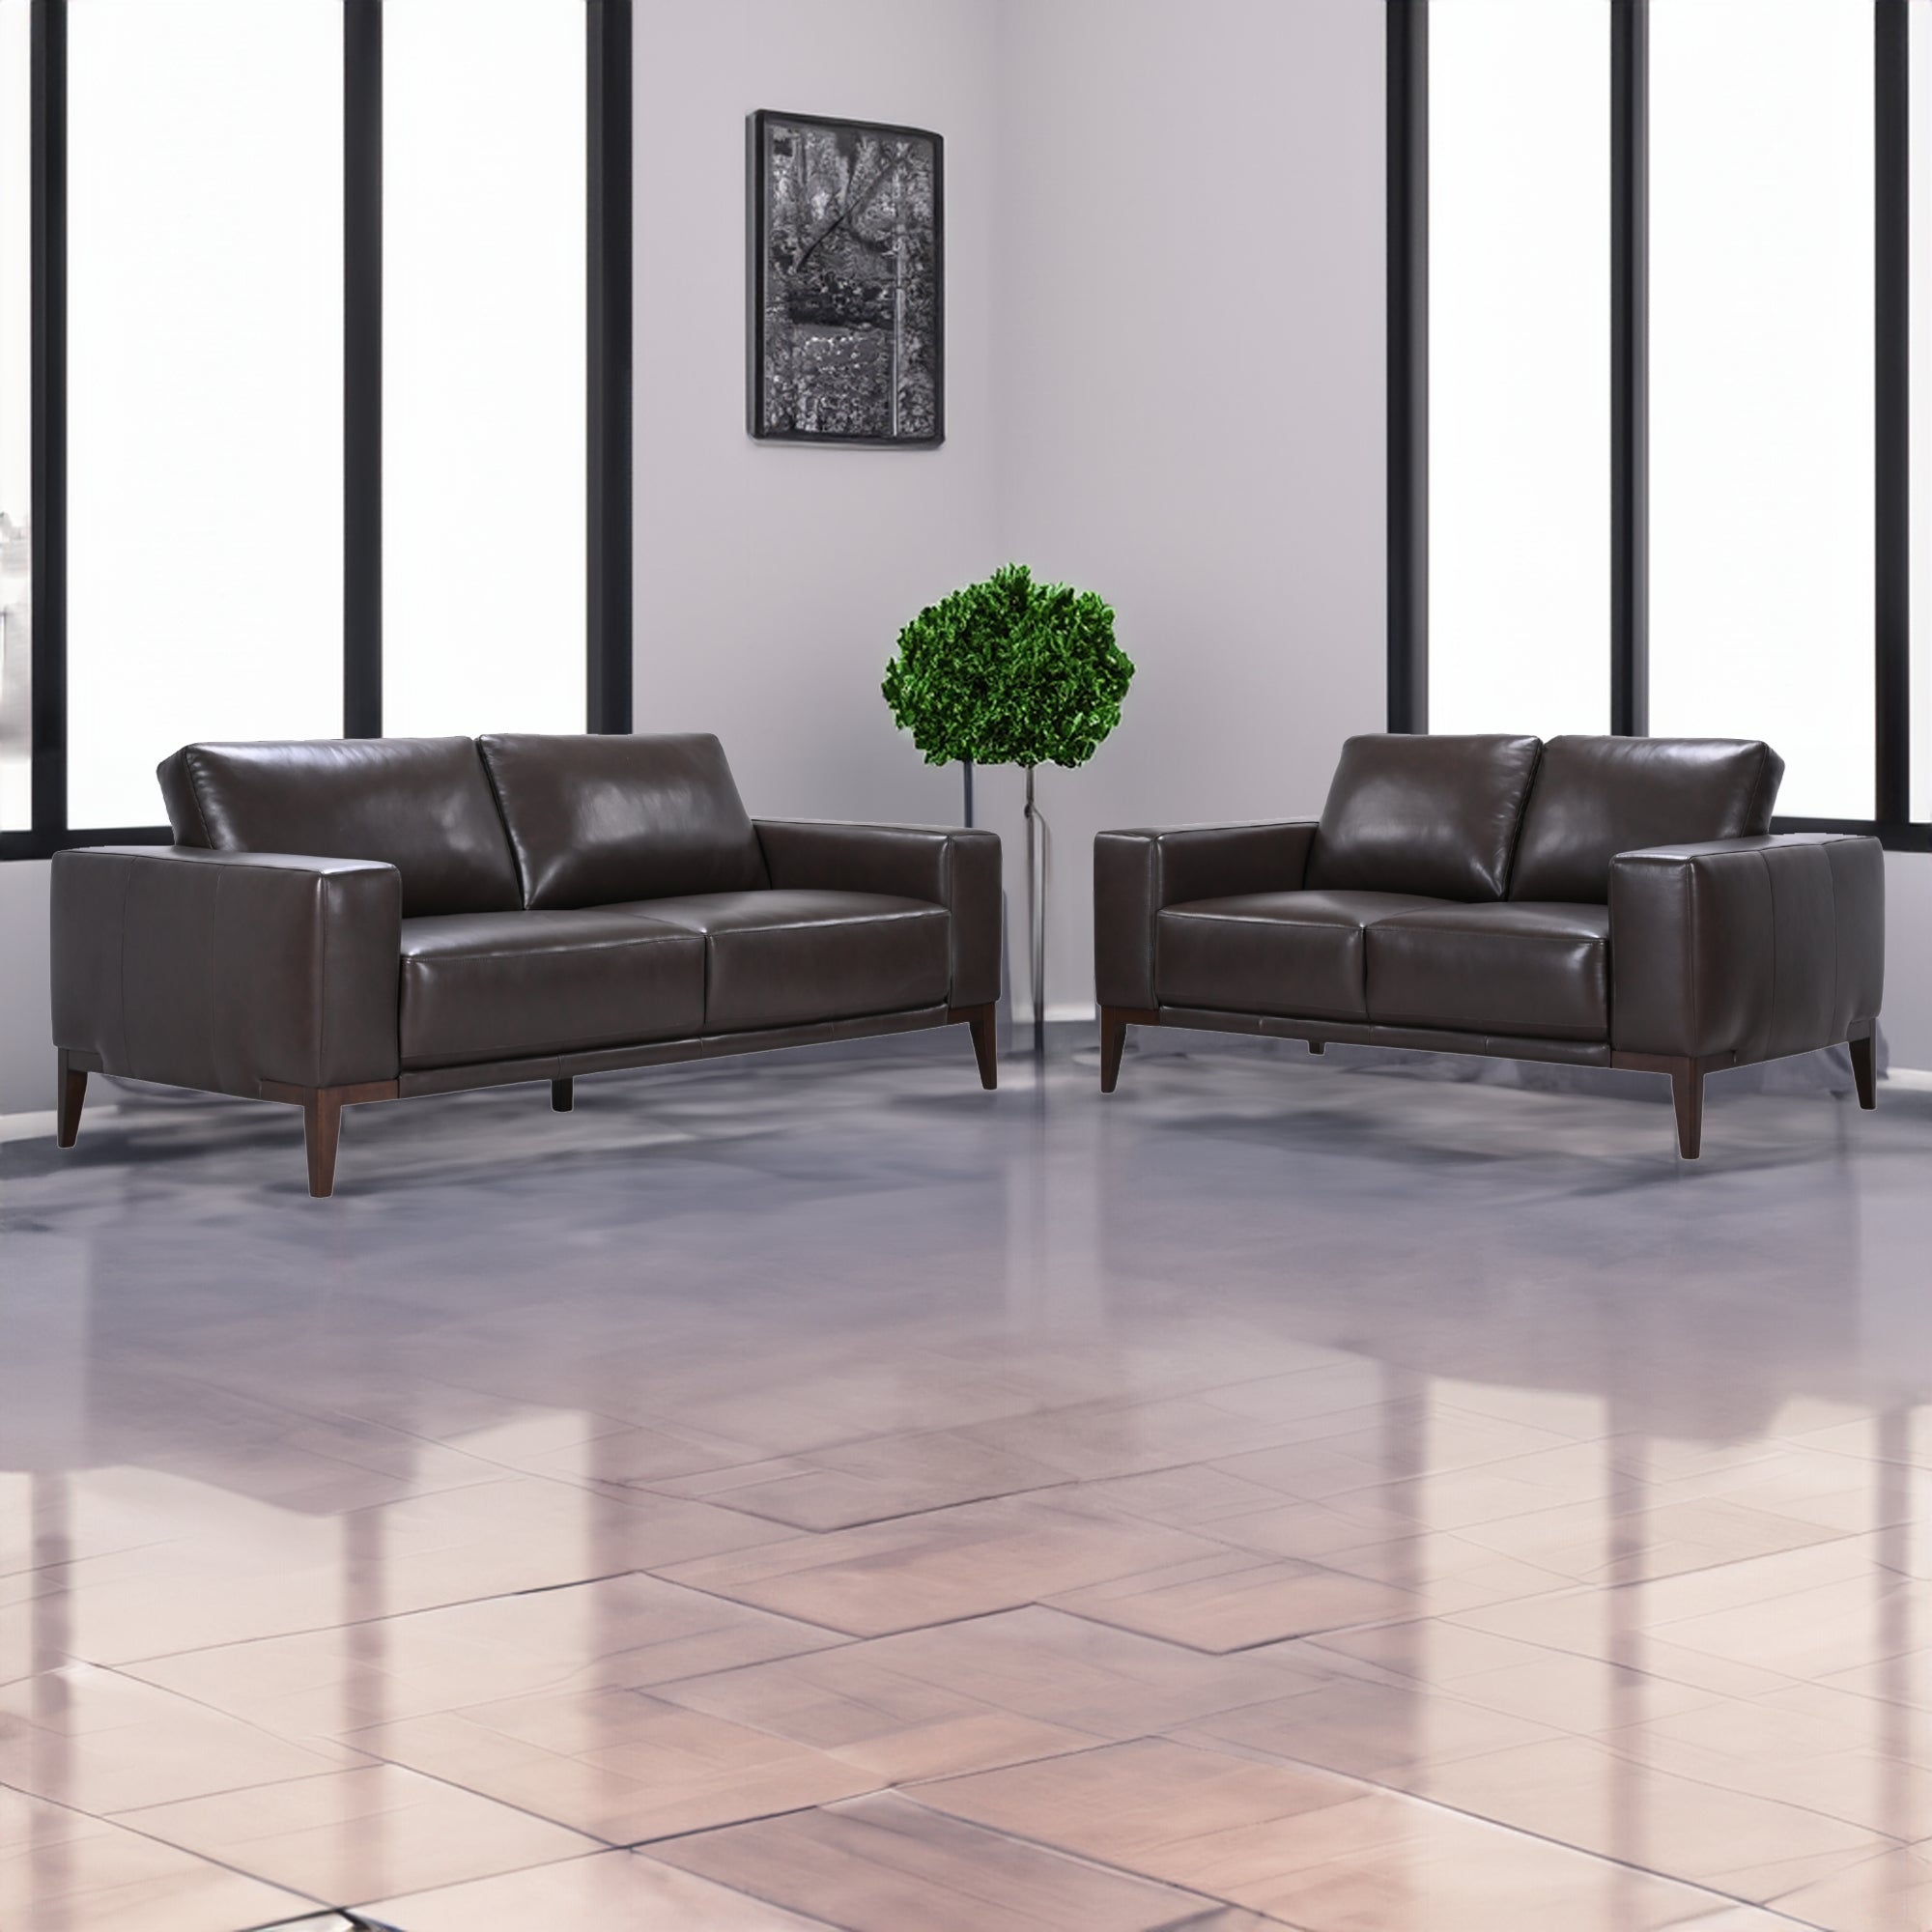 Leather Upholstered 3+2 Seater Sofa Set - Chocolate